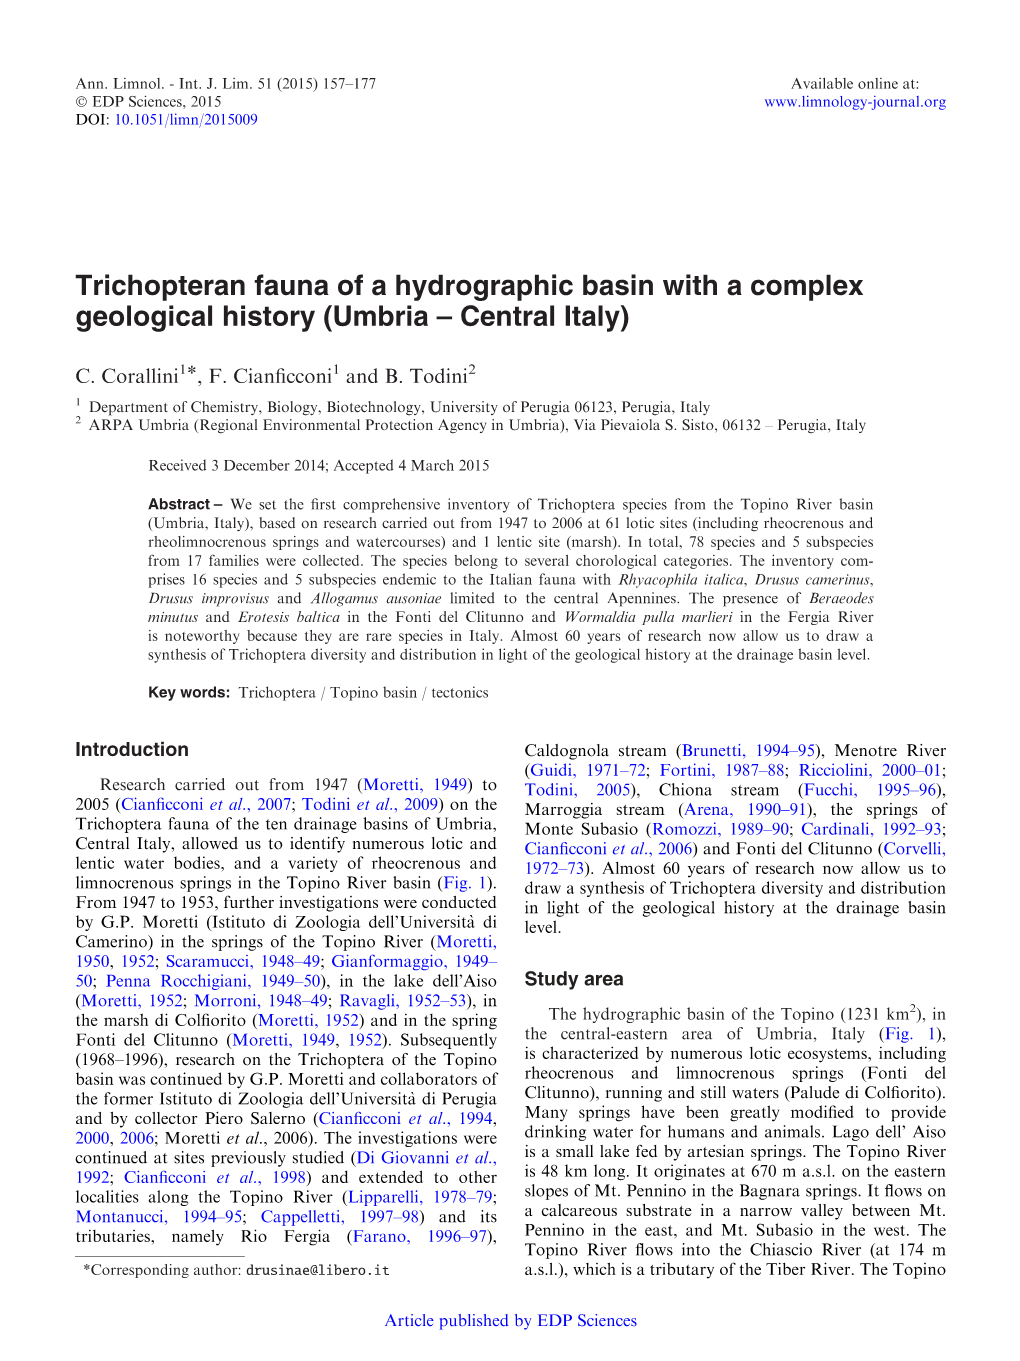 Trichopteran Fauna of a Hydrographic Basin with a Complex Geological History (Umbria – Central Italy)